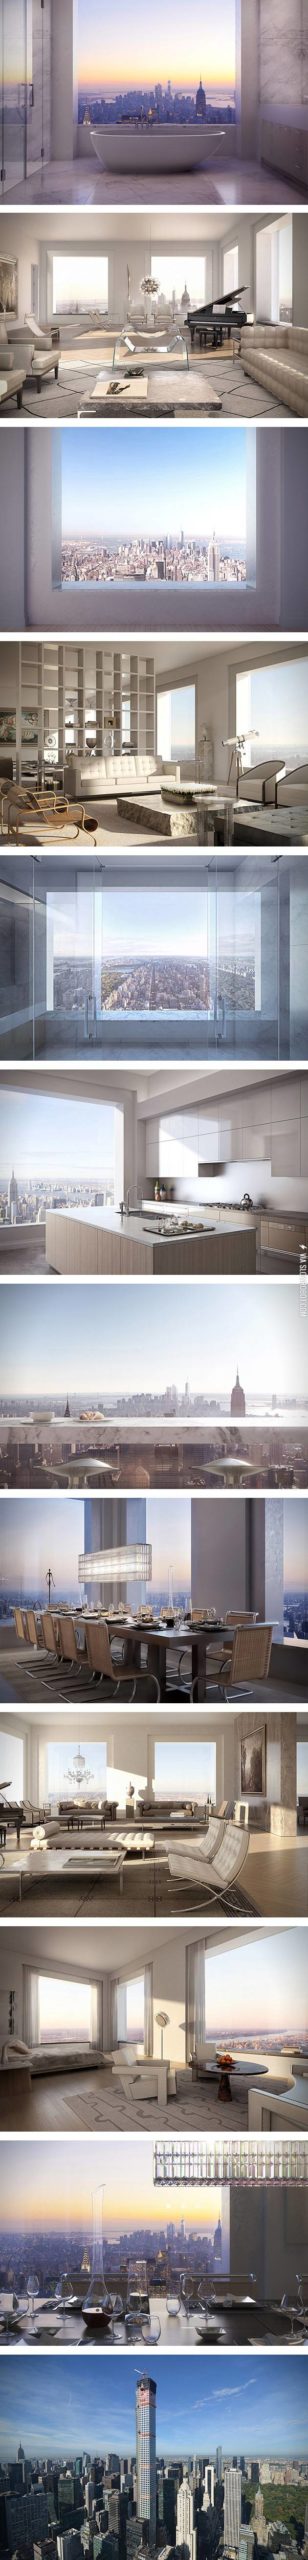 The+%2495+million+penthouse+in+NYC.